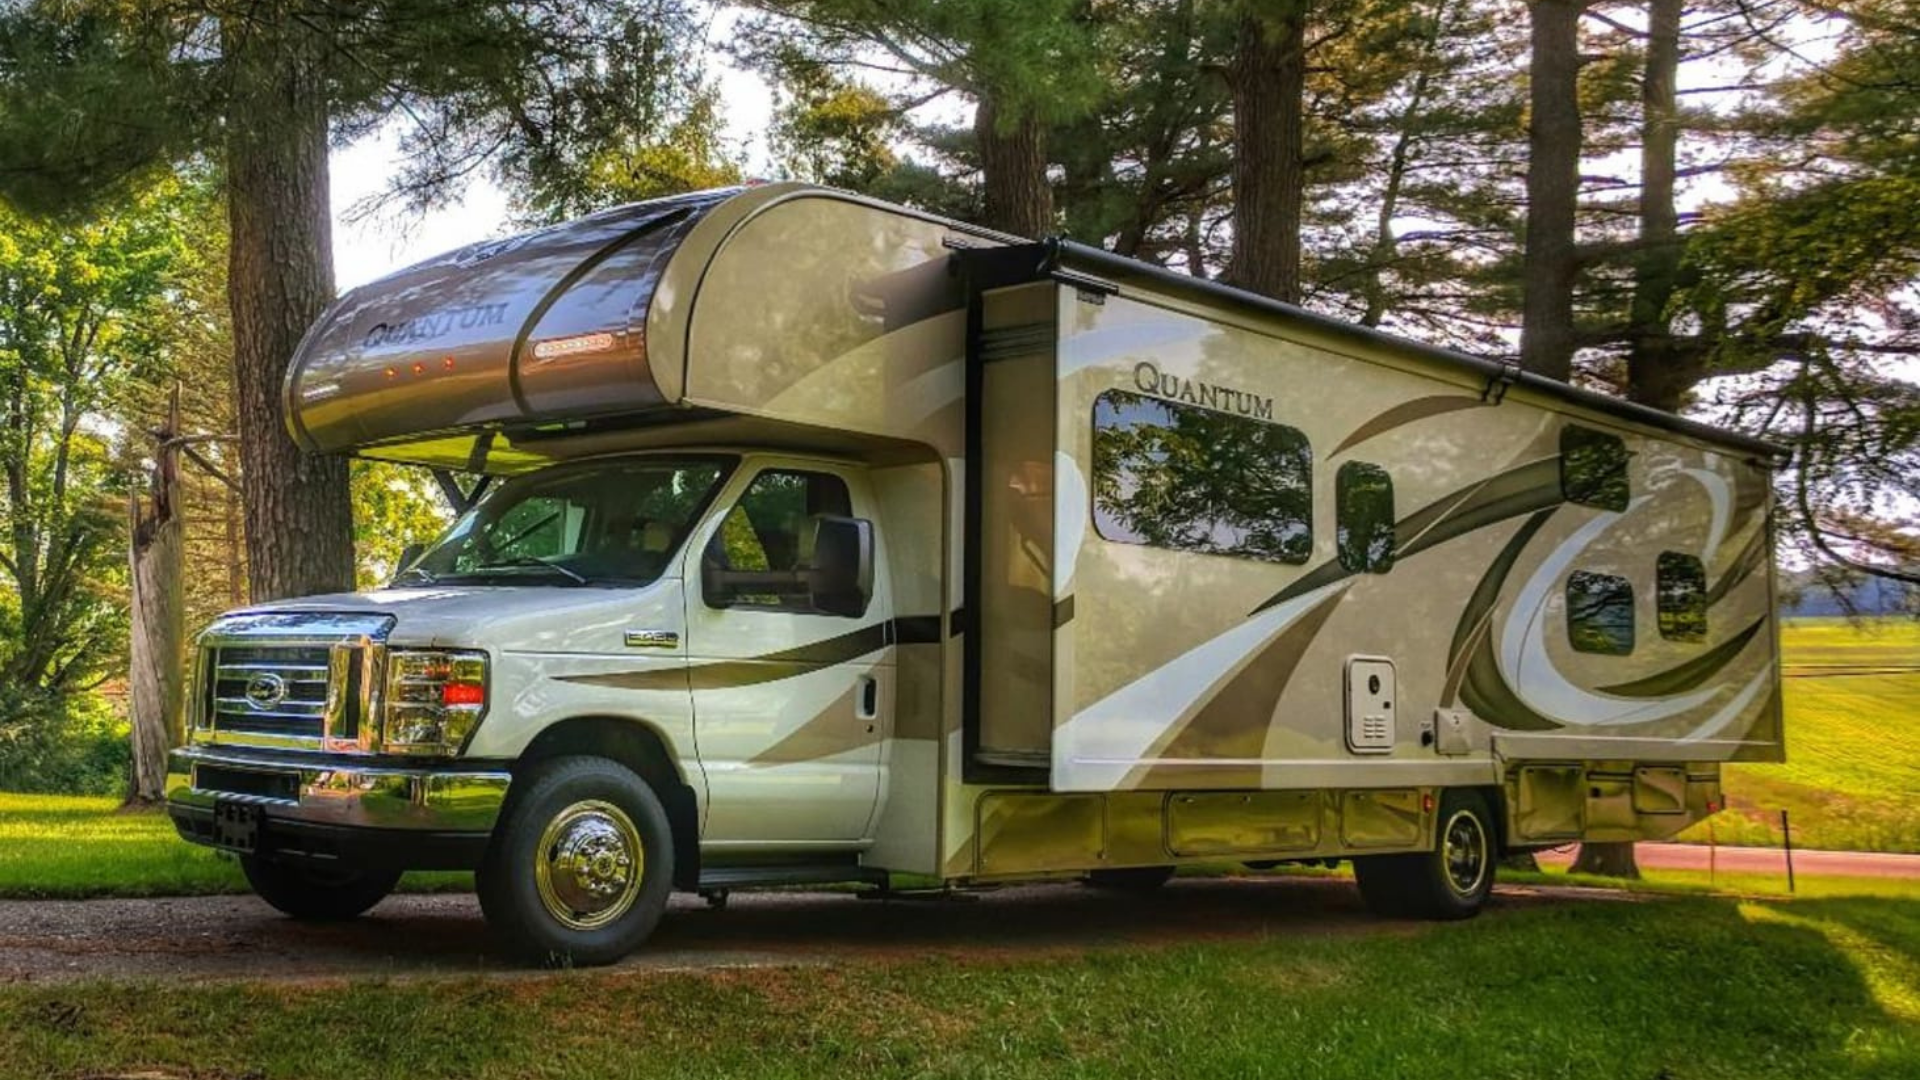 What to Look for When Renting RV